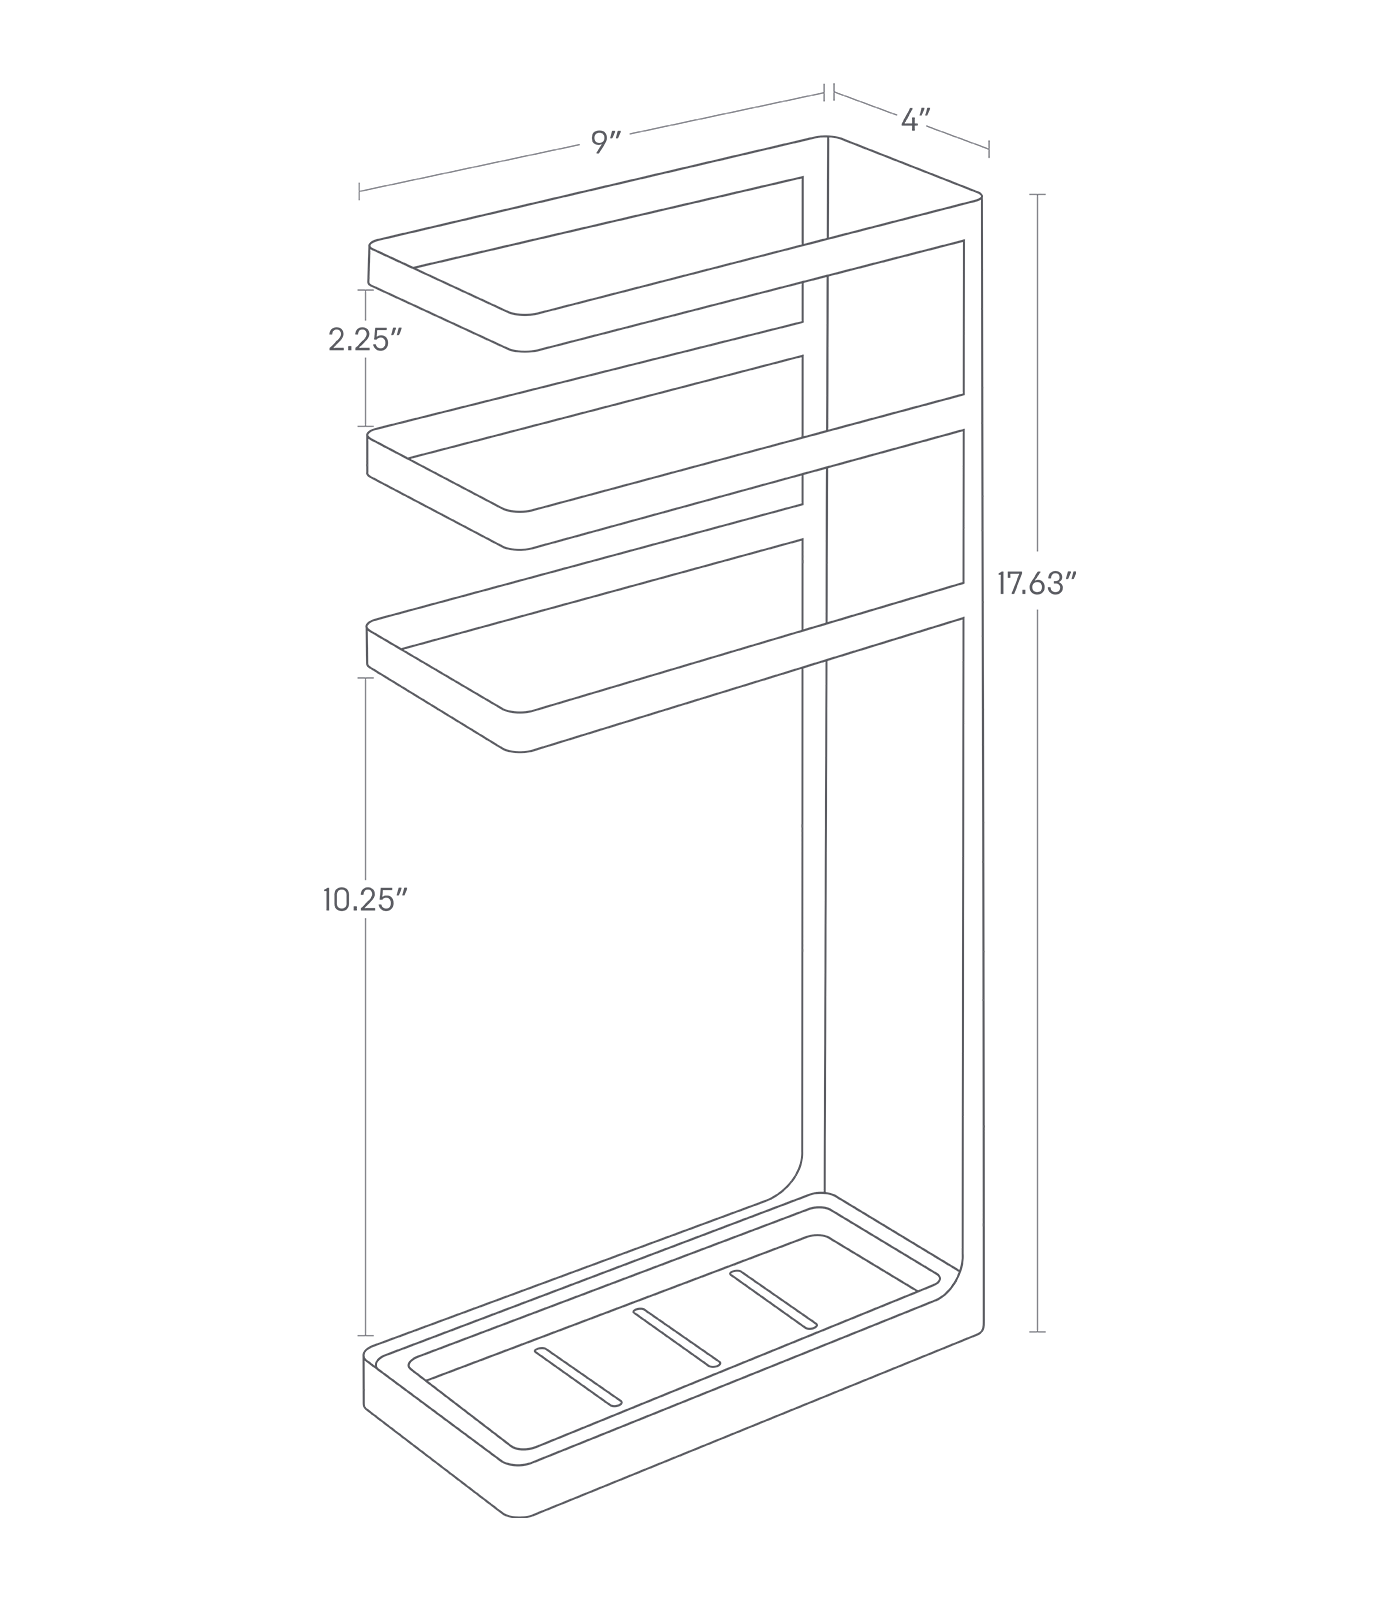 Dimension image for Umbrella Stand on a white background including dimensions  L 4.13 x W 9.06 x H 17.72 inches